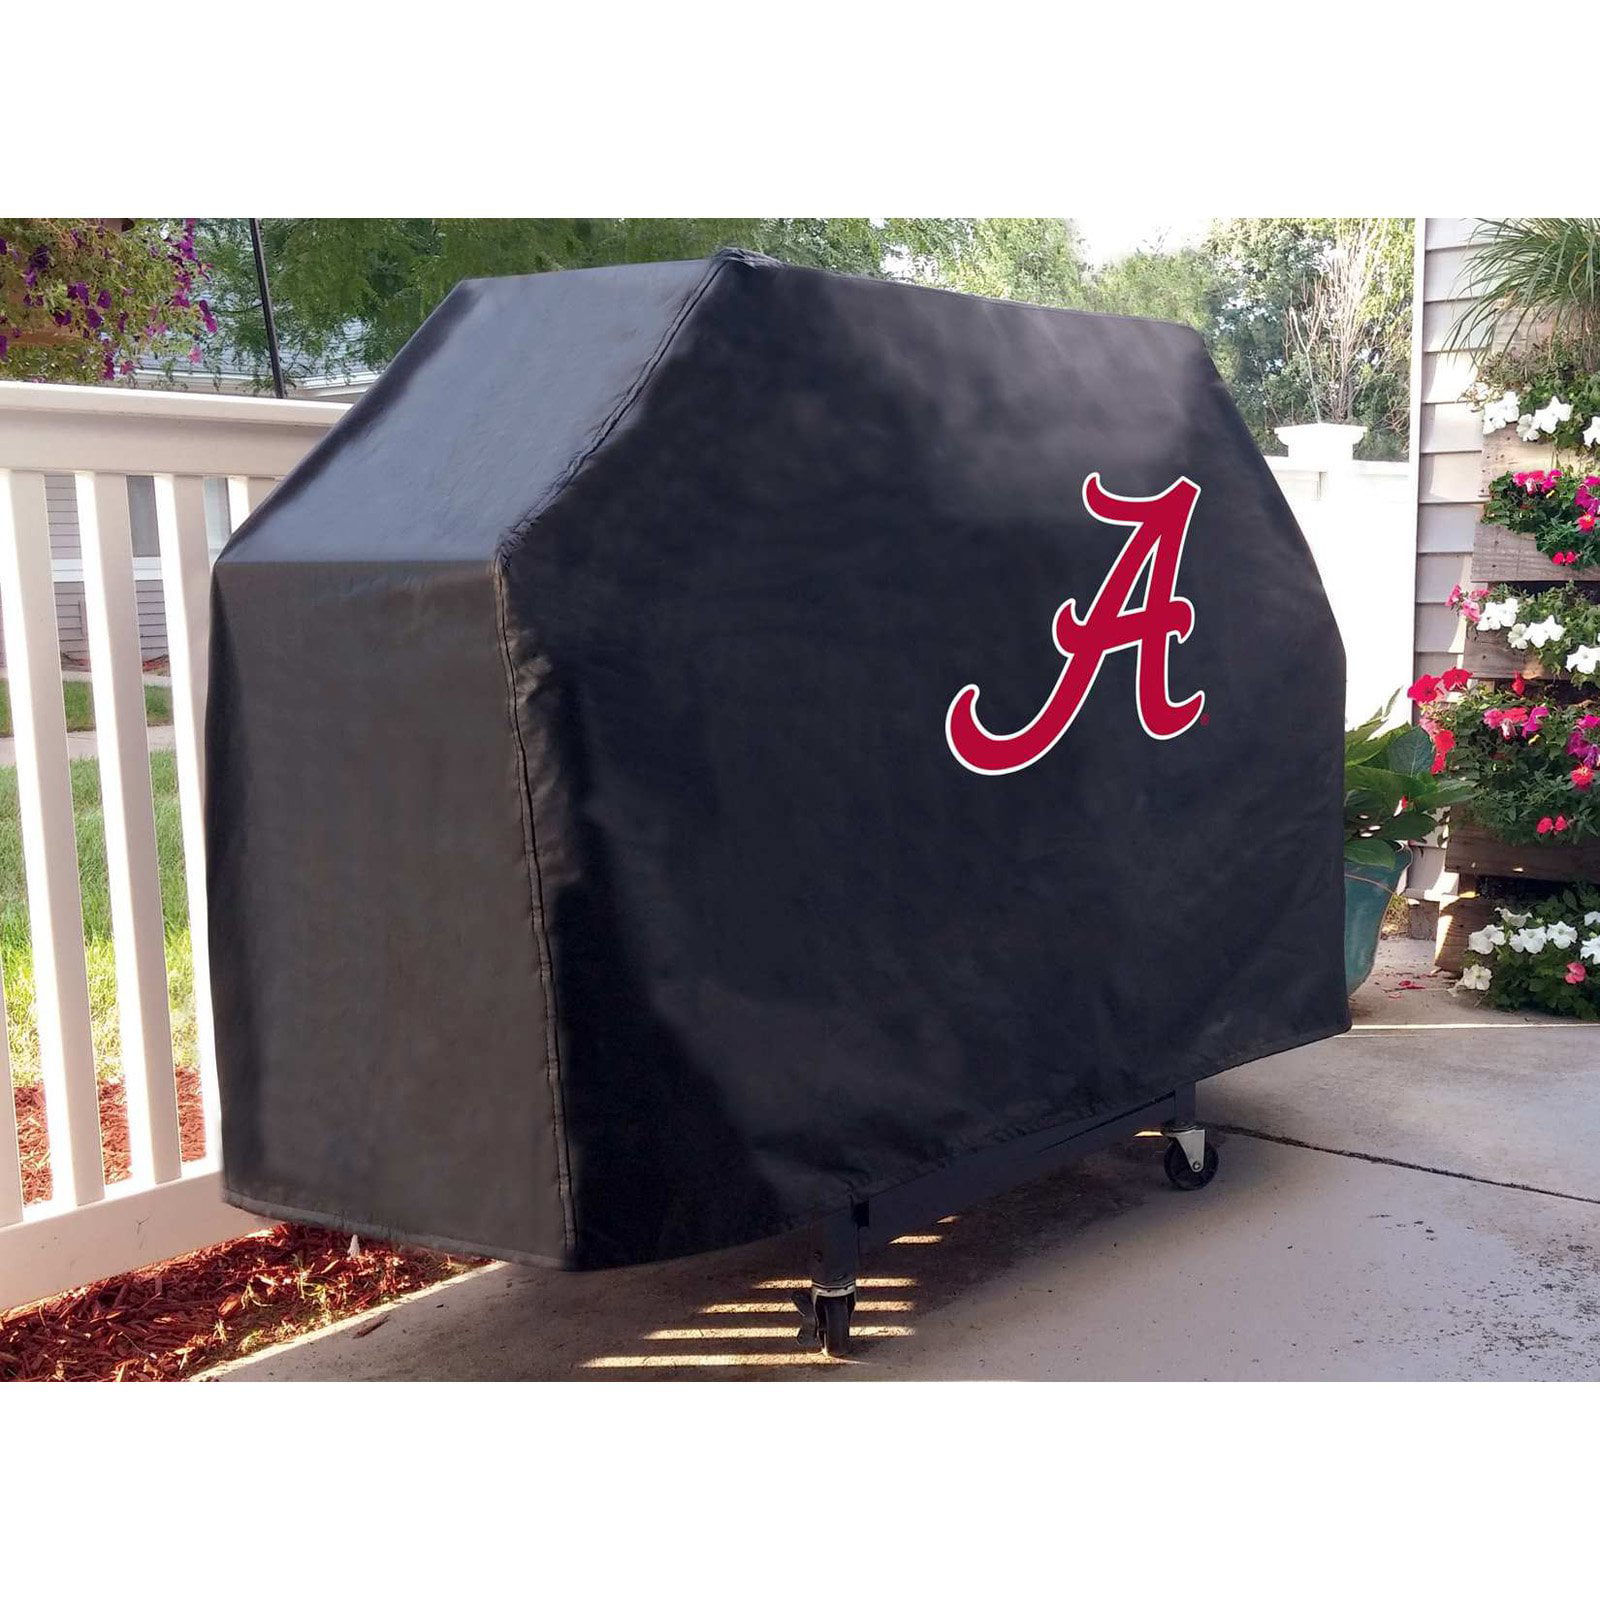 72 Rutgers Grill Cover by Holland Covers 